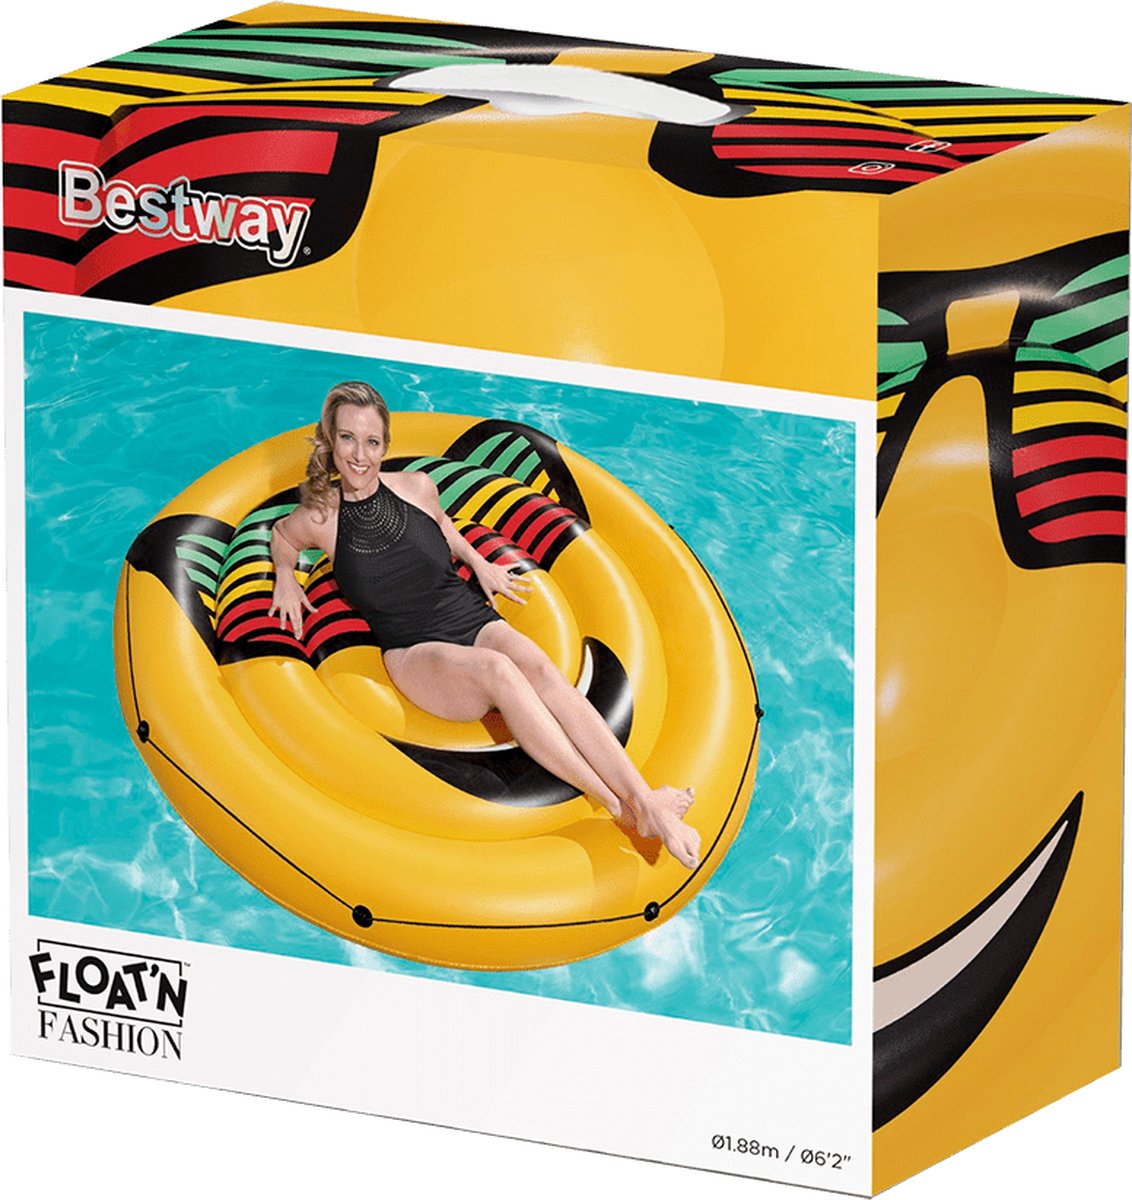 Bestway Luchtbed rond summerstyles 188 | bol.com